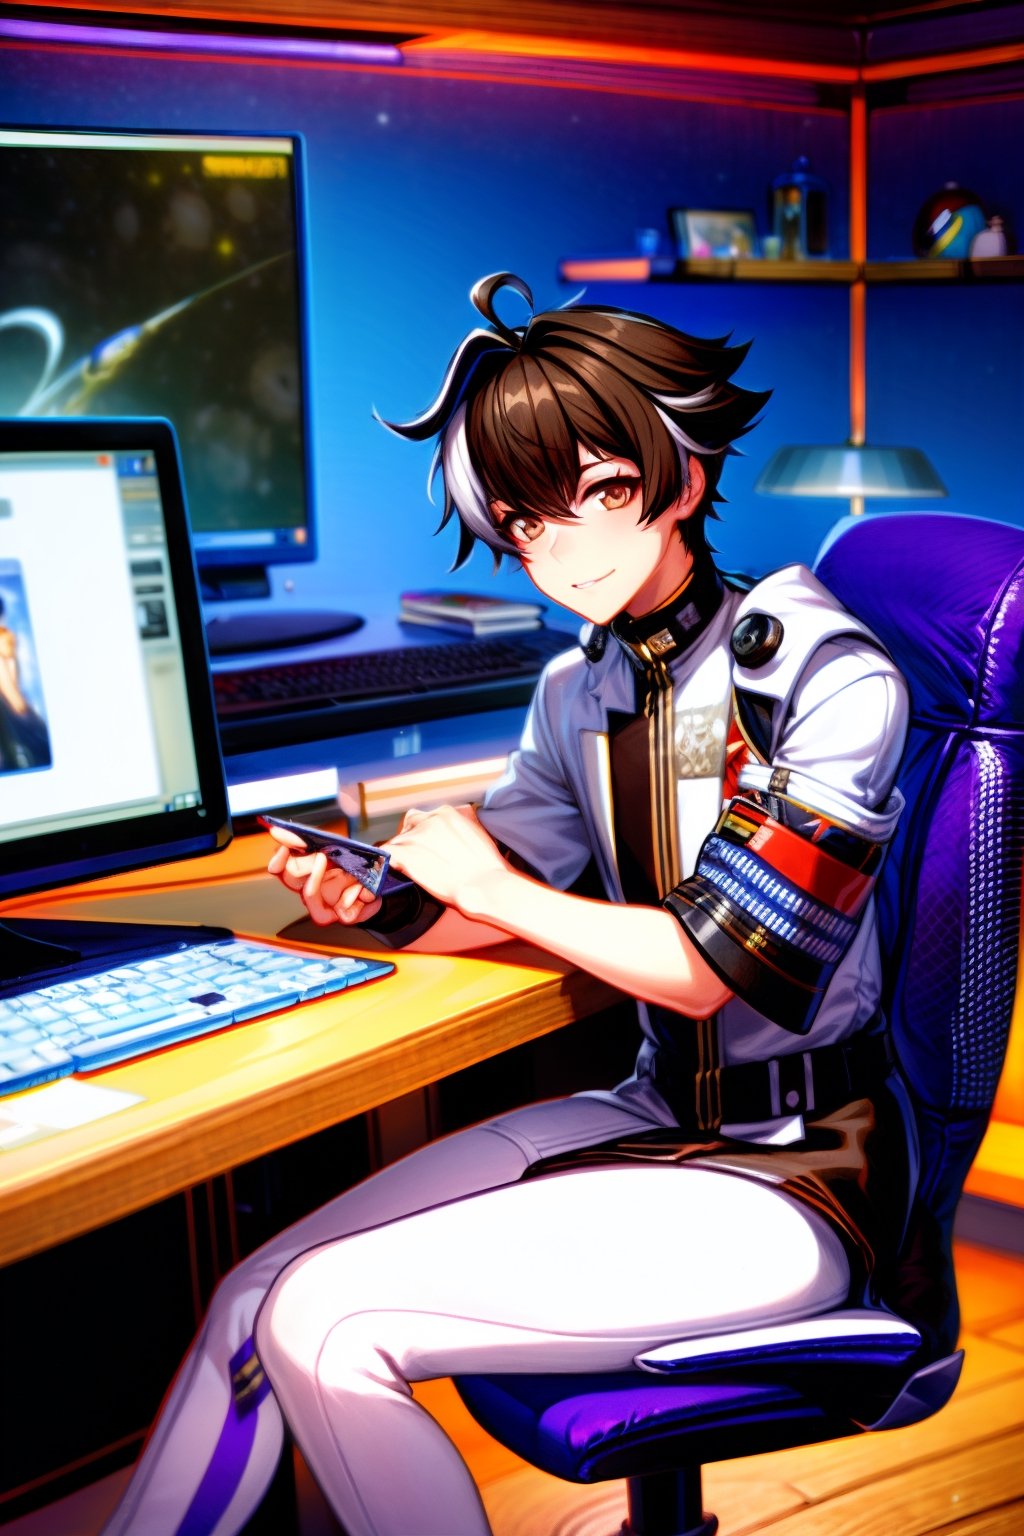  twenty year old space captain, brown hair, white locks of hair, sitting in an office, looking trading cards in hand, bedroom , computer table,, twenty year old space captain, brown hair, white locks of hair, sitting in an office, looking at trading cards, computer table,military_uniform Japanese navy,

